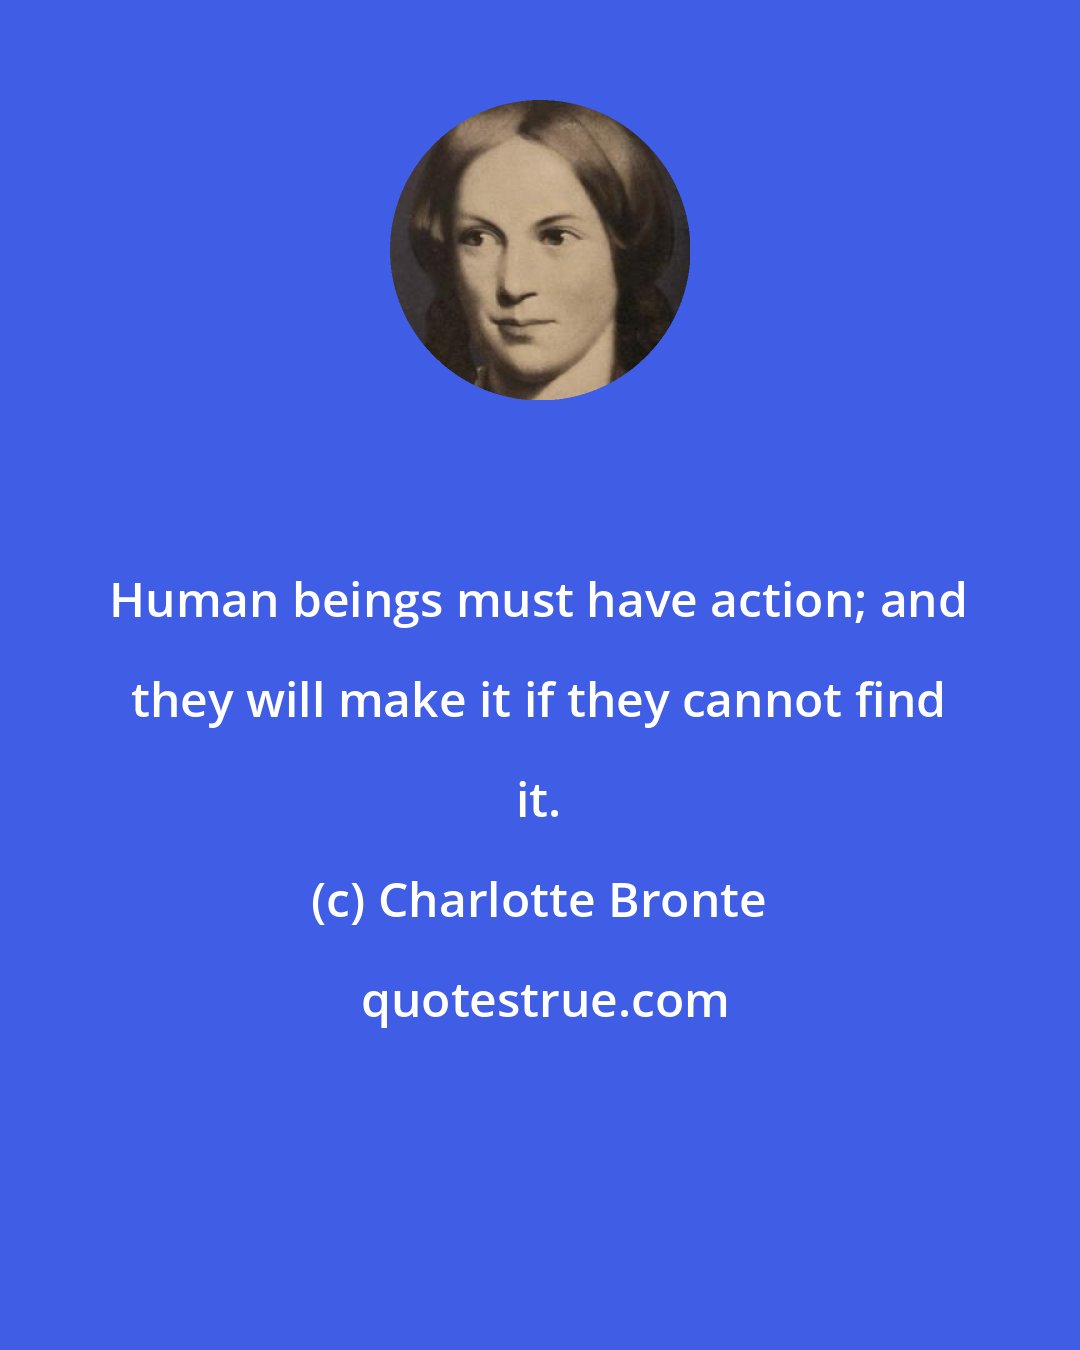 Charlotte Bronte: Human beings must have action; and they will make it if they cannot find it.